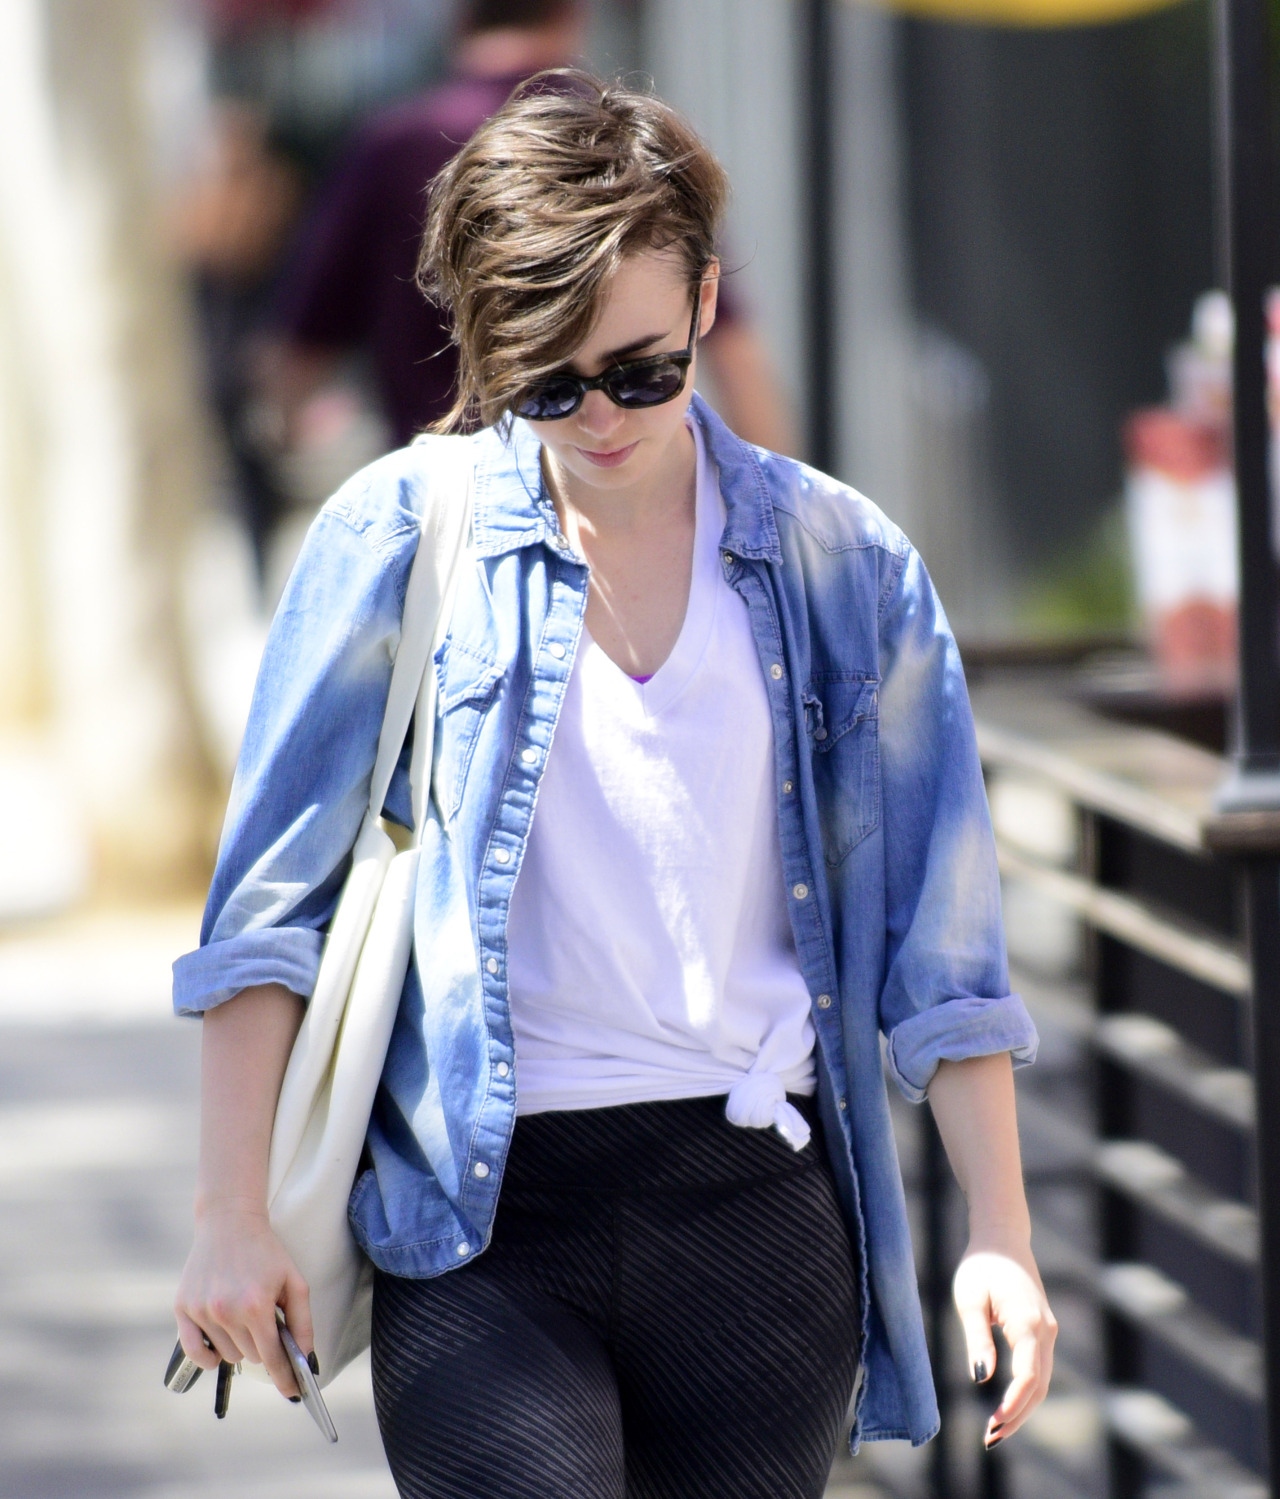 lilycollinsnews: Lily Collins - Leaves Body Pilates in West Hollywood 04/29/2015